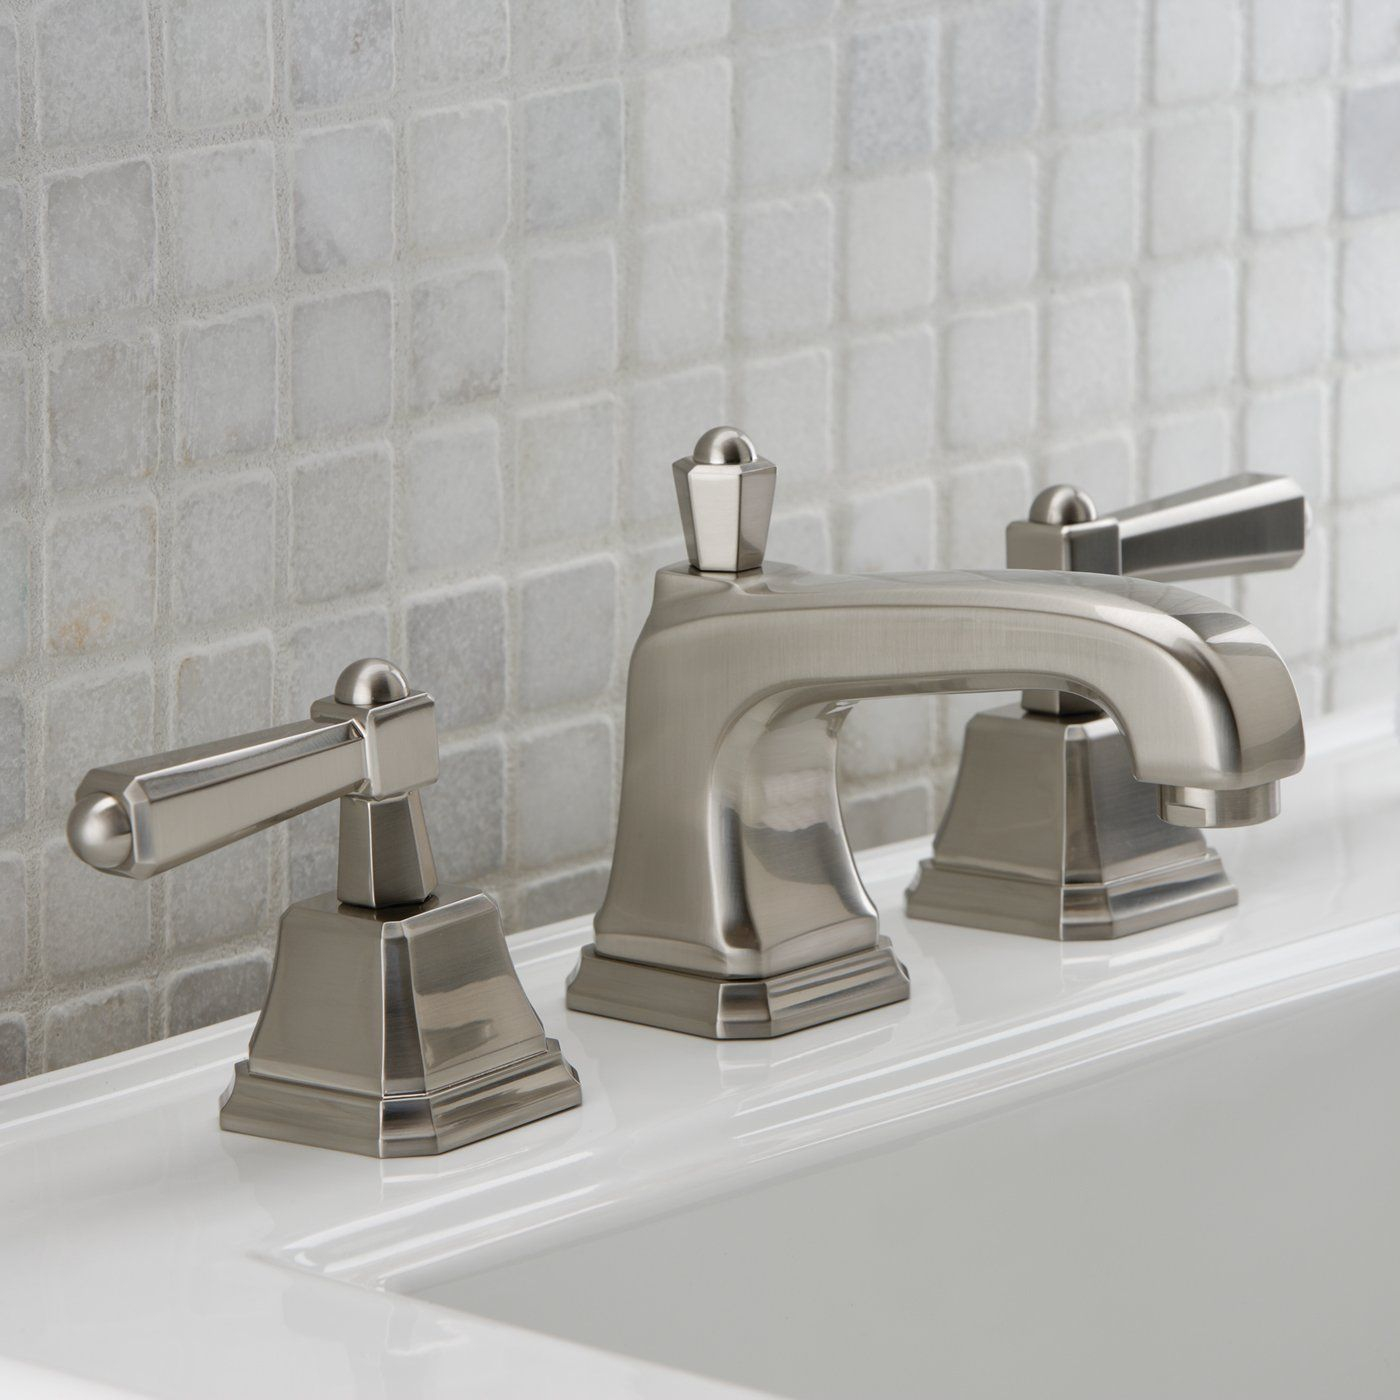 Mico Designs Ltd 500 W1 Mb Wilson Widespread Faucet Does Come In In Dimensions 1400 X 1400 